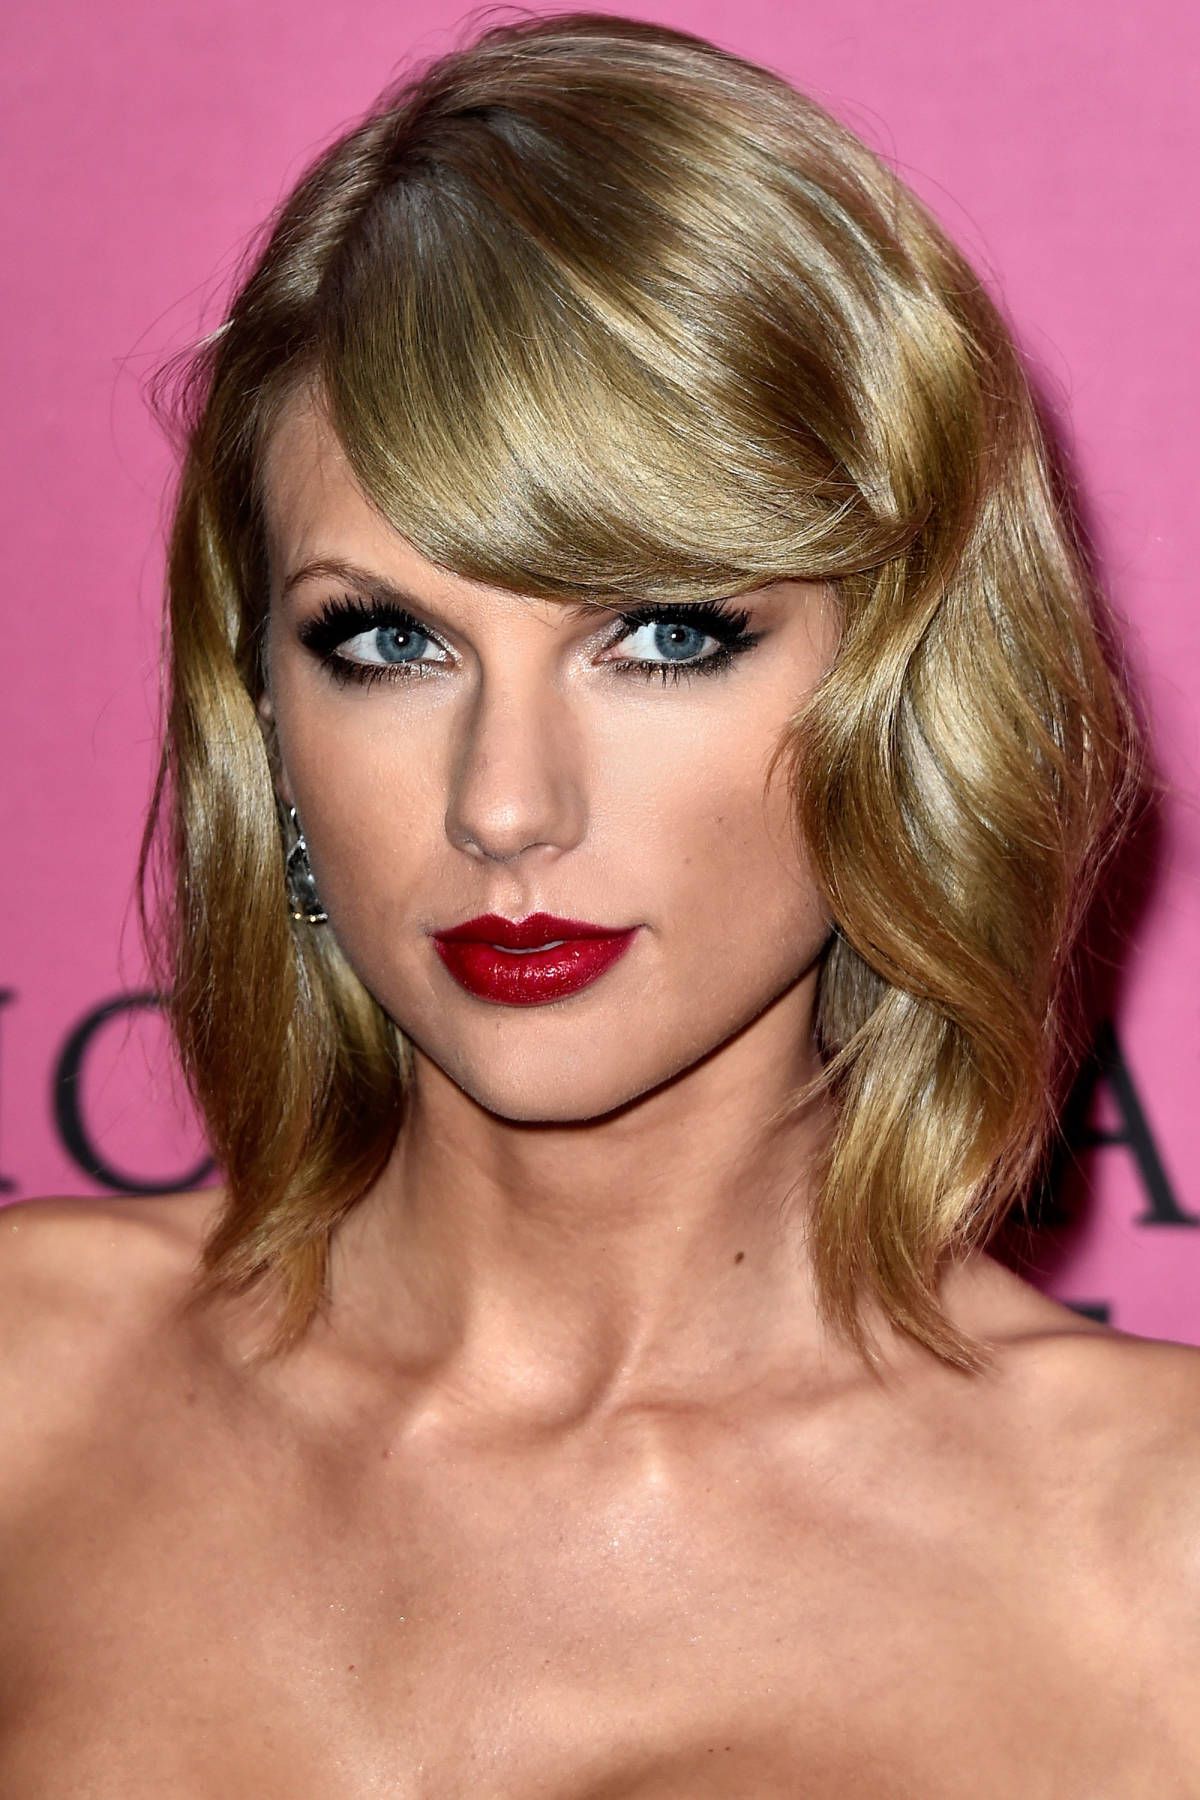 Taylor Swift Hairstyles Taylor Swift S Curly Straight Short